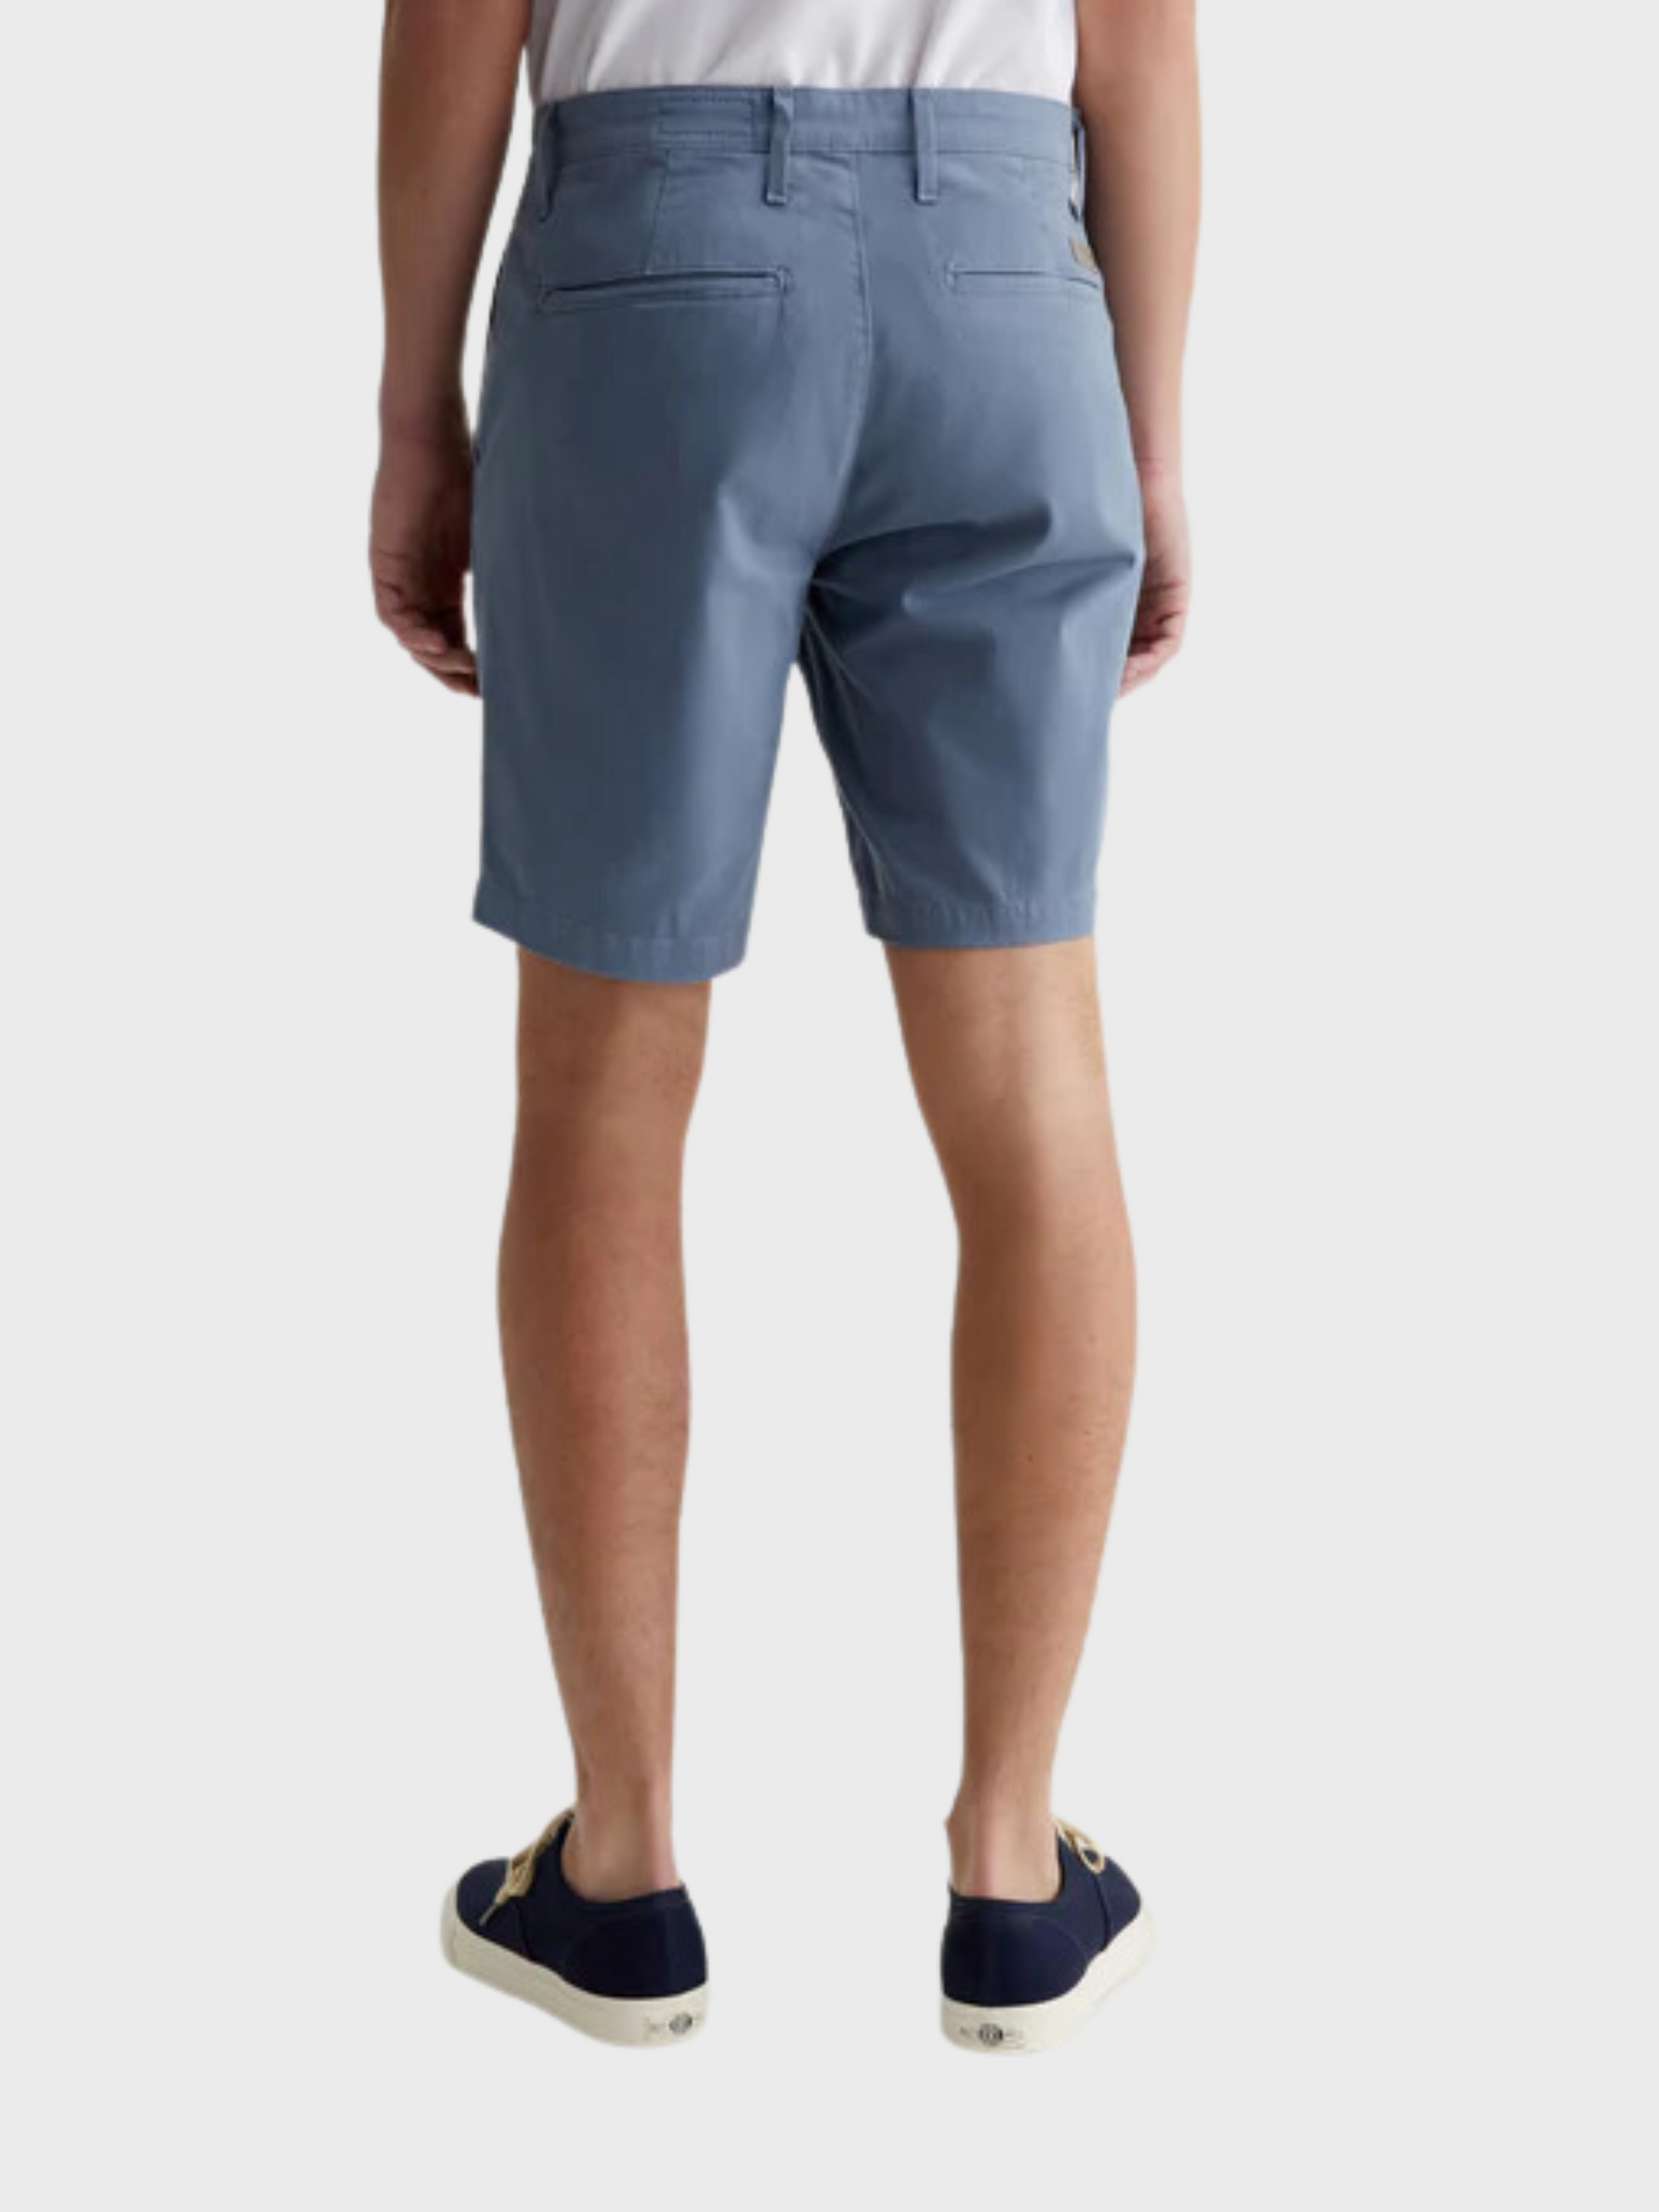 AG Wanderer Shorts Blue Ice SS24-Men's Shorts-Brooklyn-Vancouver-Yaletown-Canada